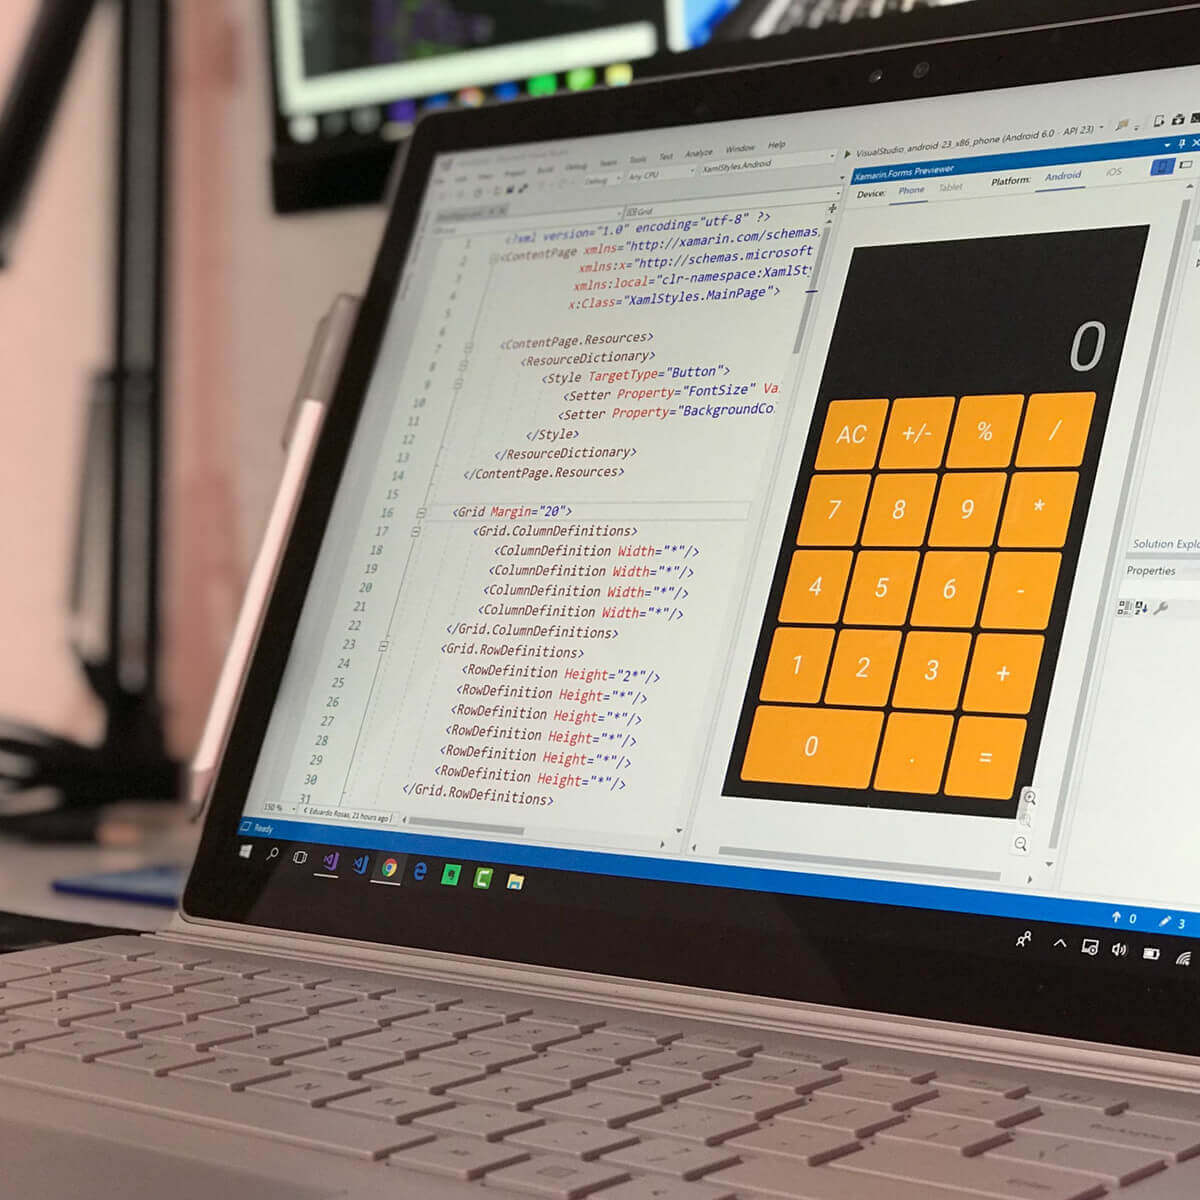 Windows 10 to get graphing functionalities in the Calculator app